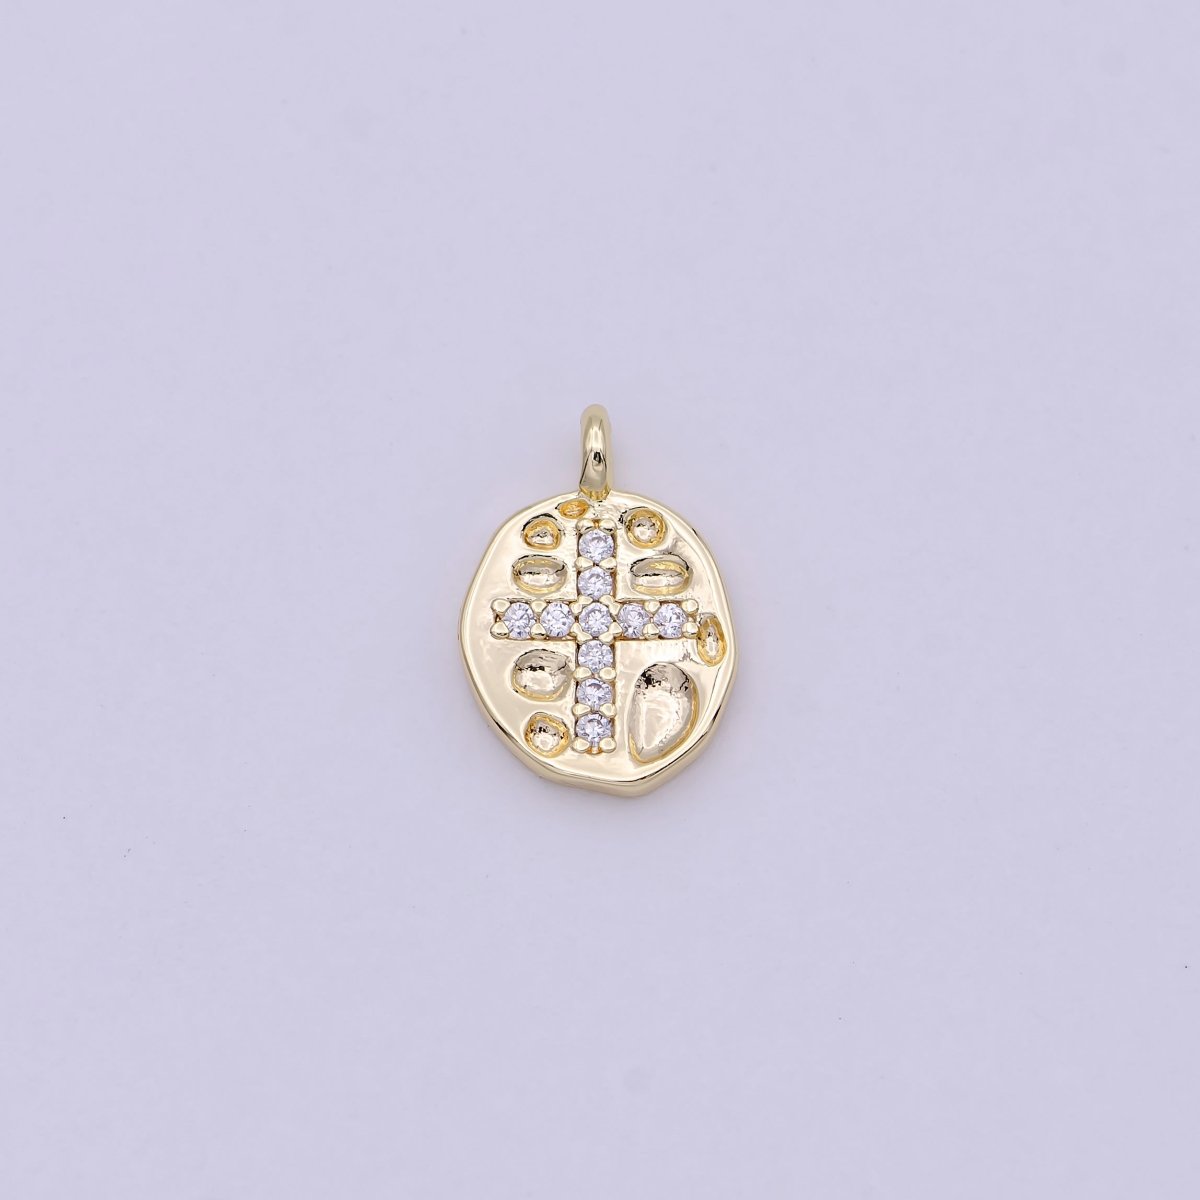 Gold Filled Mini Coin Charm Micro Pave Cross Pendant for Add on Charm Religious Jewelry N-453 - DLUXCA